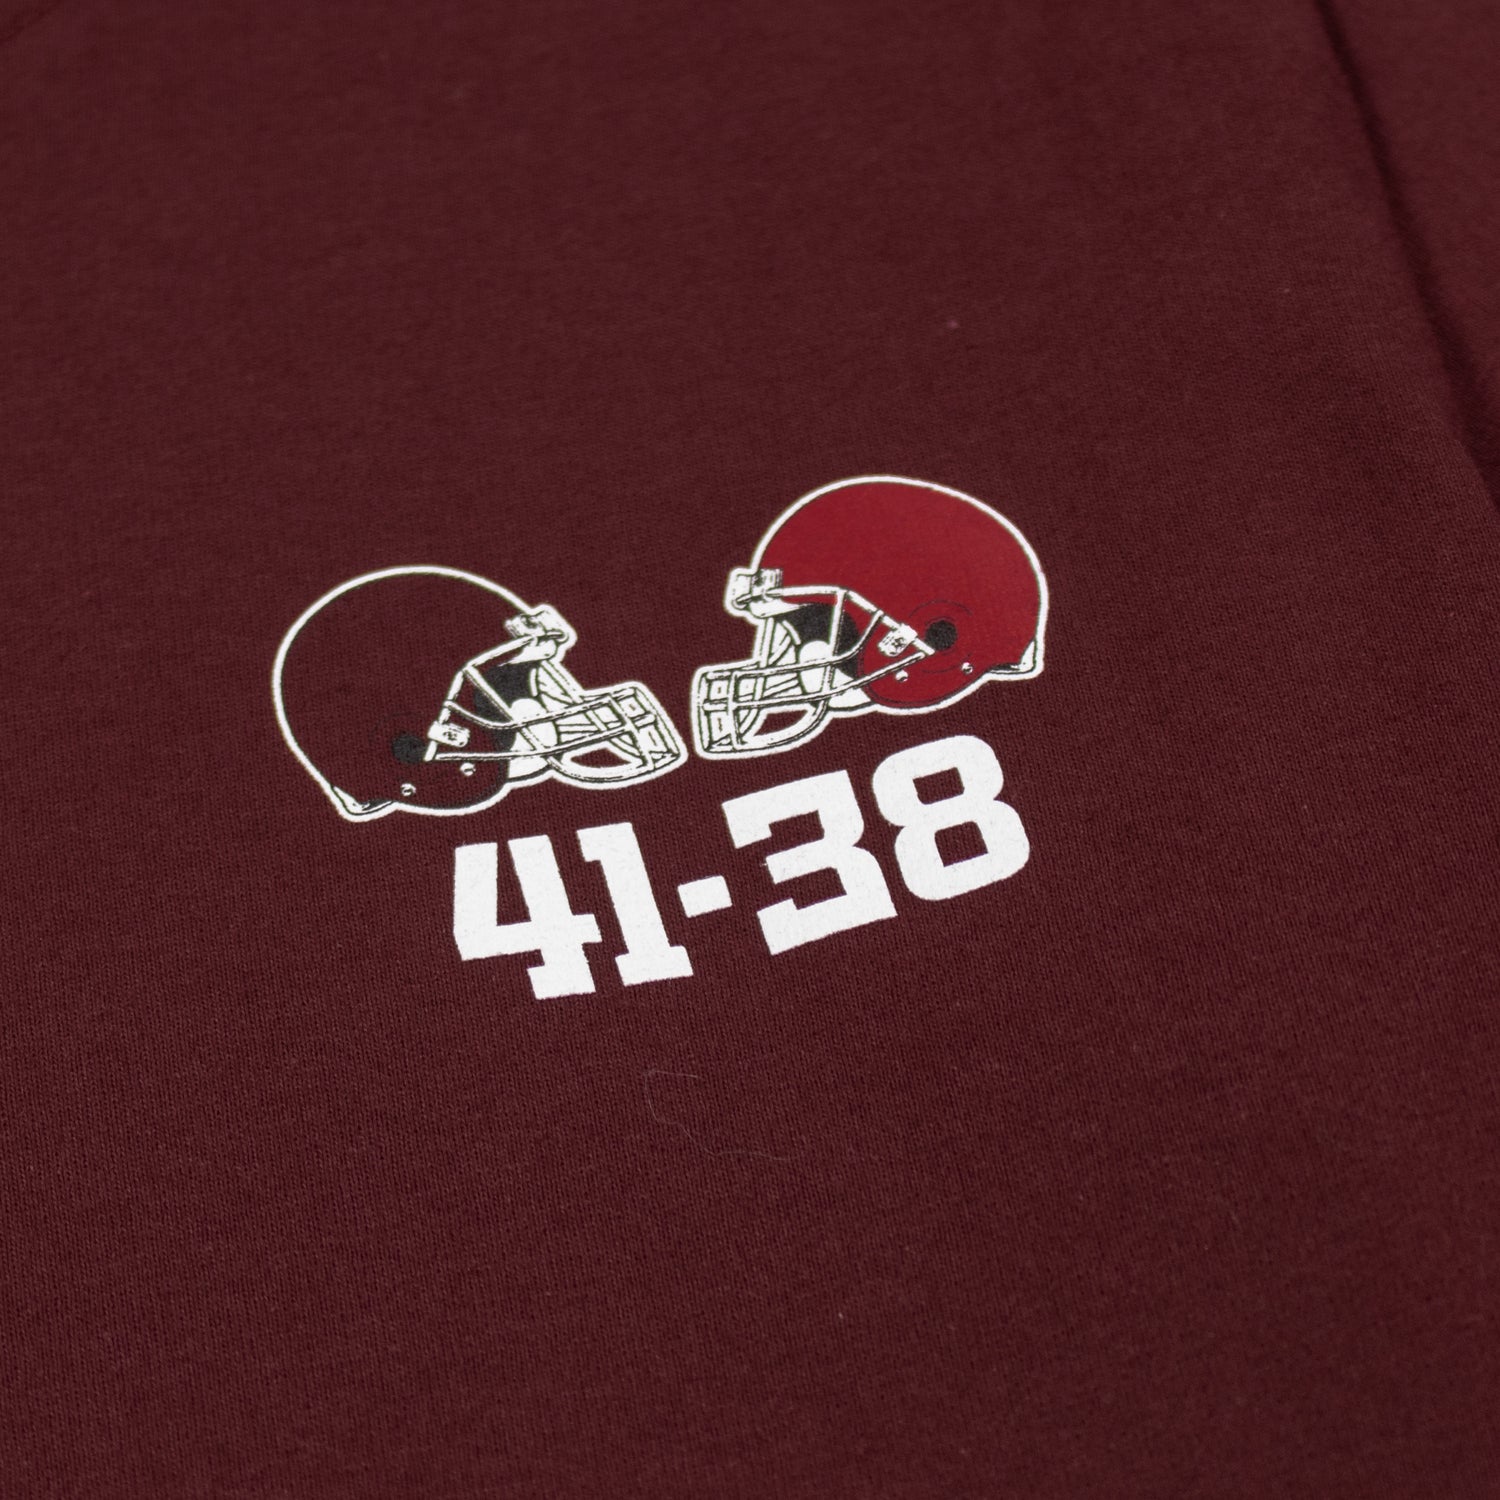 Maroon We Ain't Done Yet Rushing The Field T-Shirt